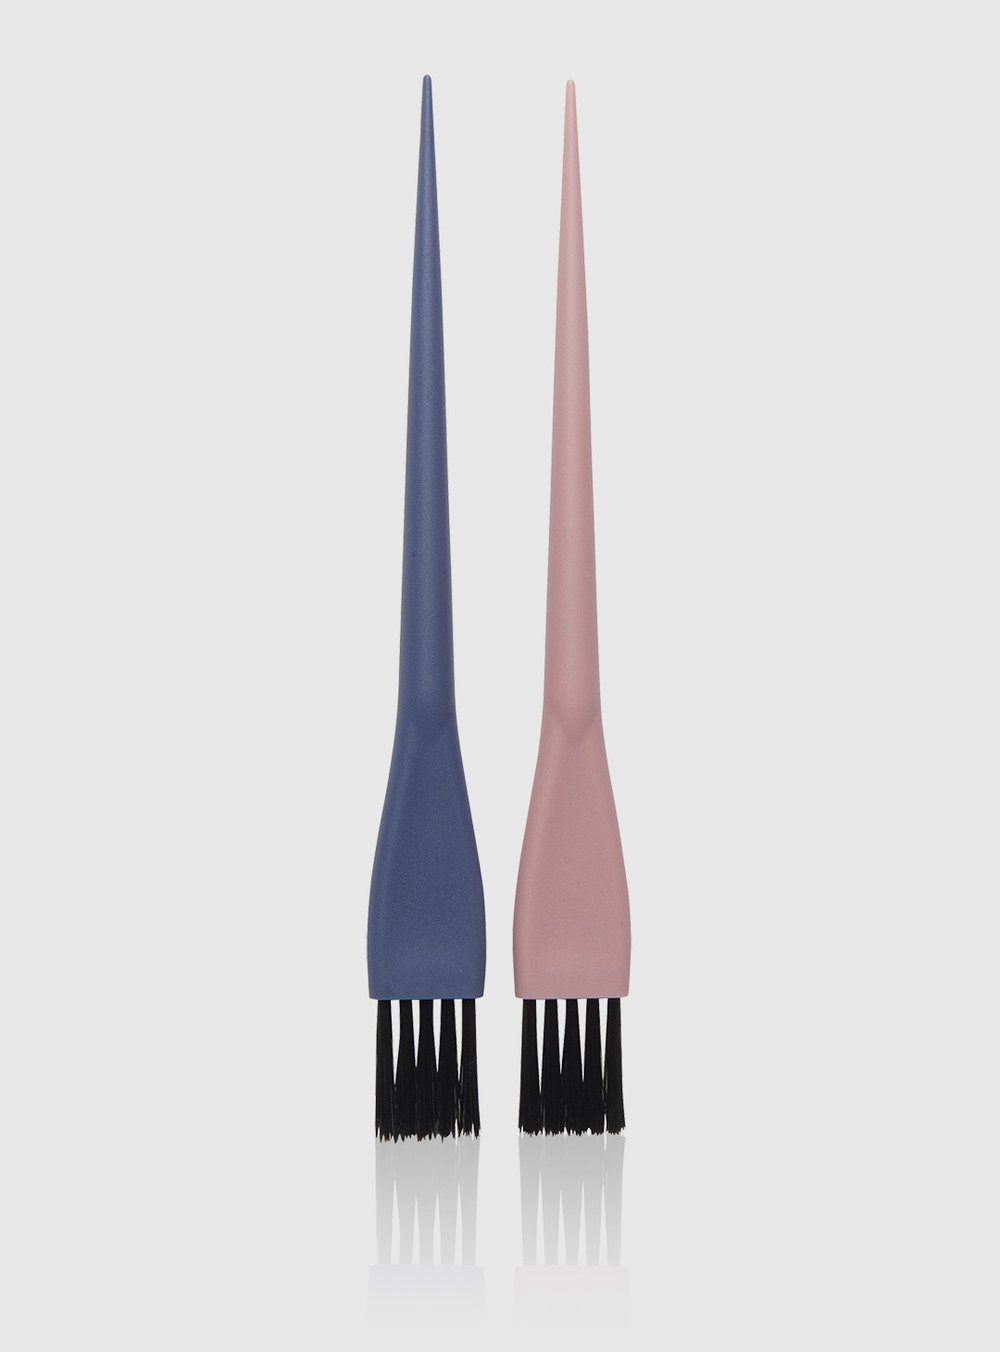 FROMM PRO 7/8" Soft Color Brush 2 Pack